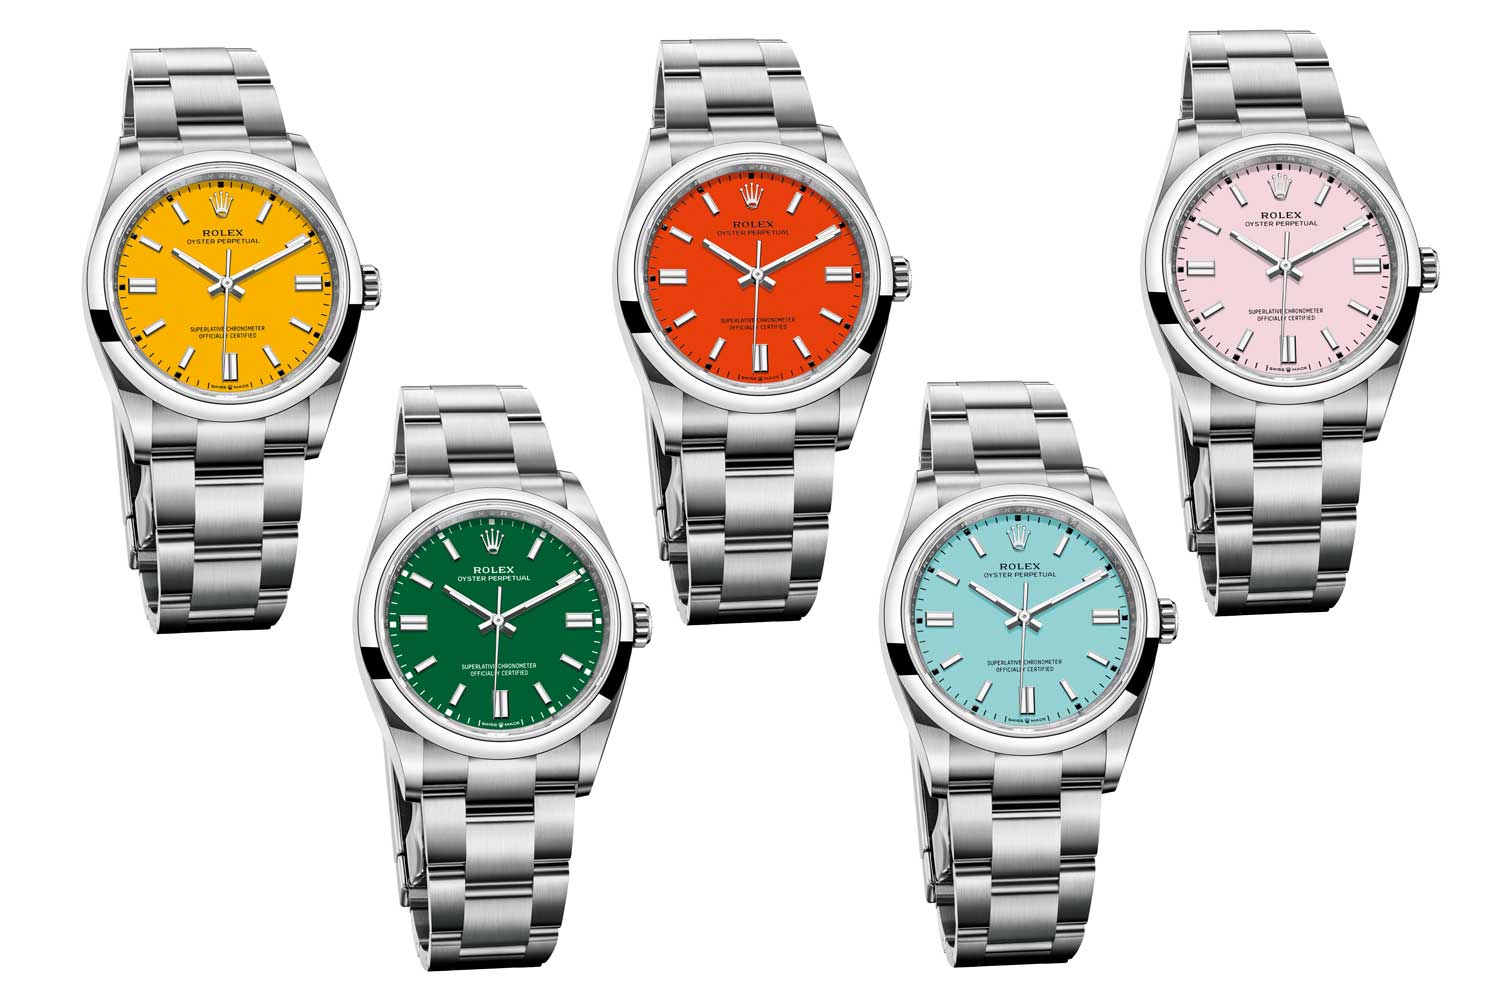 The Oyster Perpetual collection with vibrant opaque lacquer dials in yellow, coral red, pink, turquoise blue and green